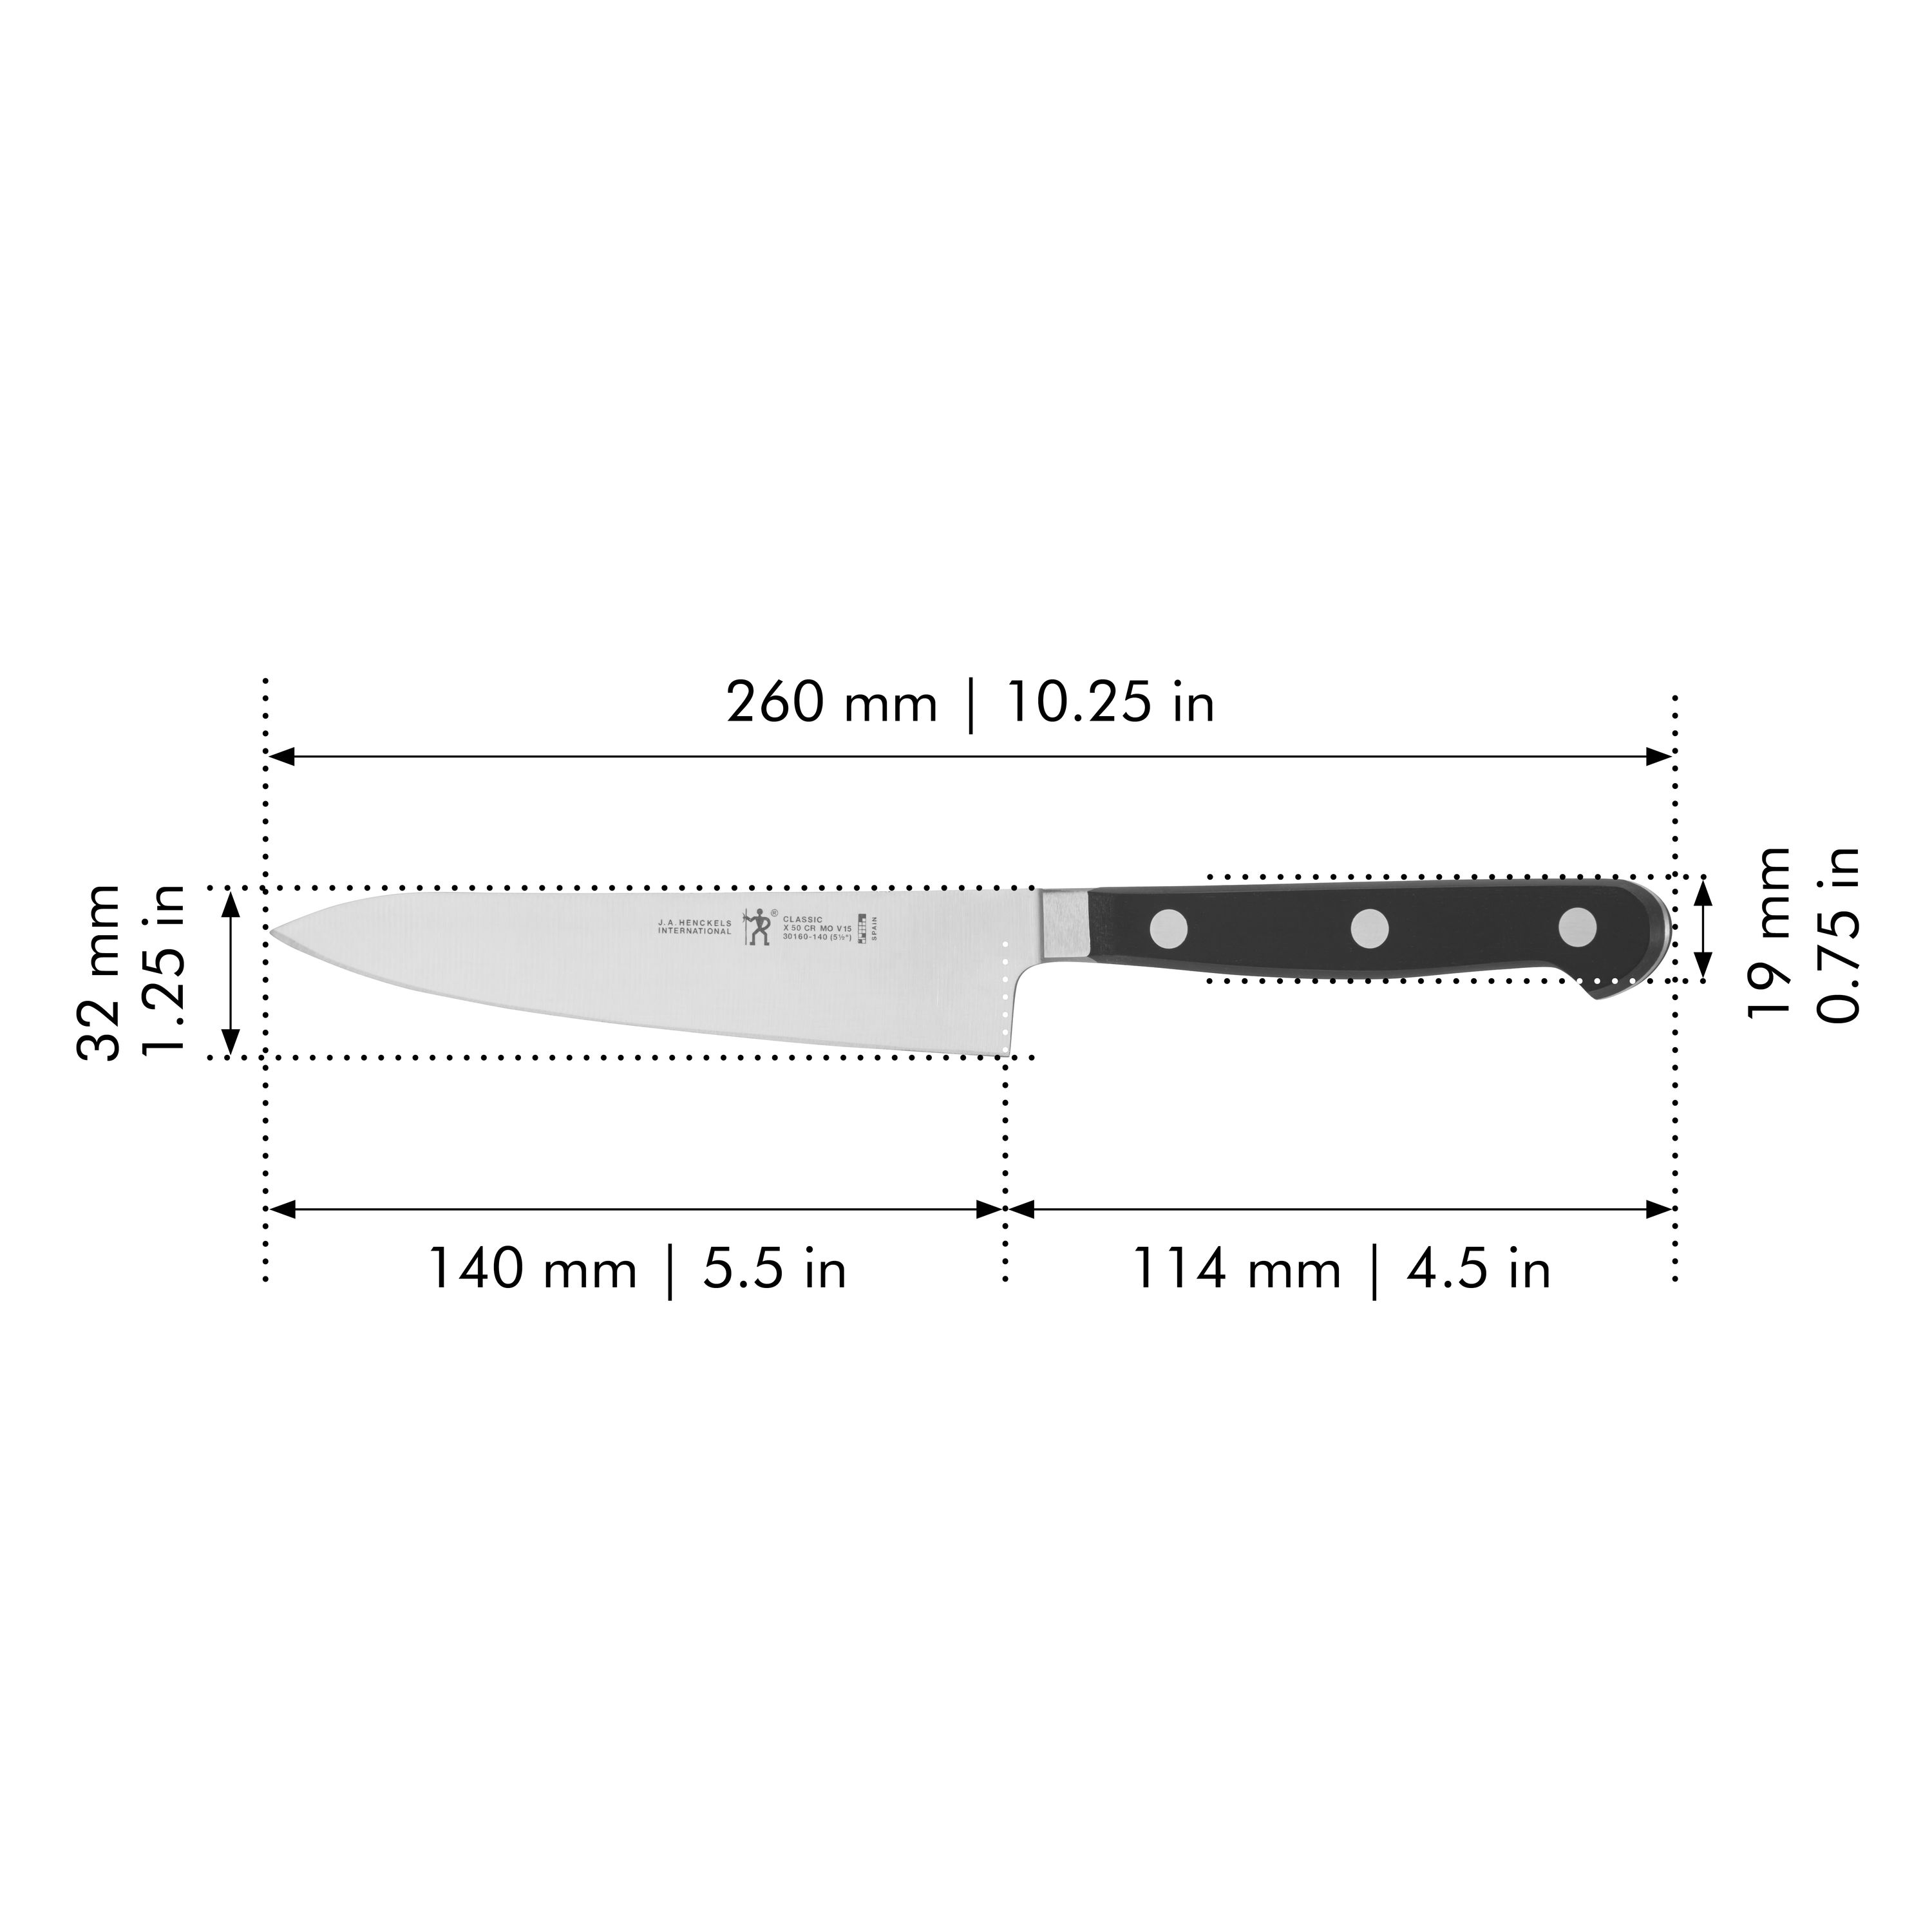 Buy Henckels Classic Precision Chef's knife compact